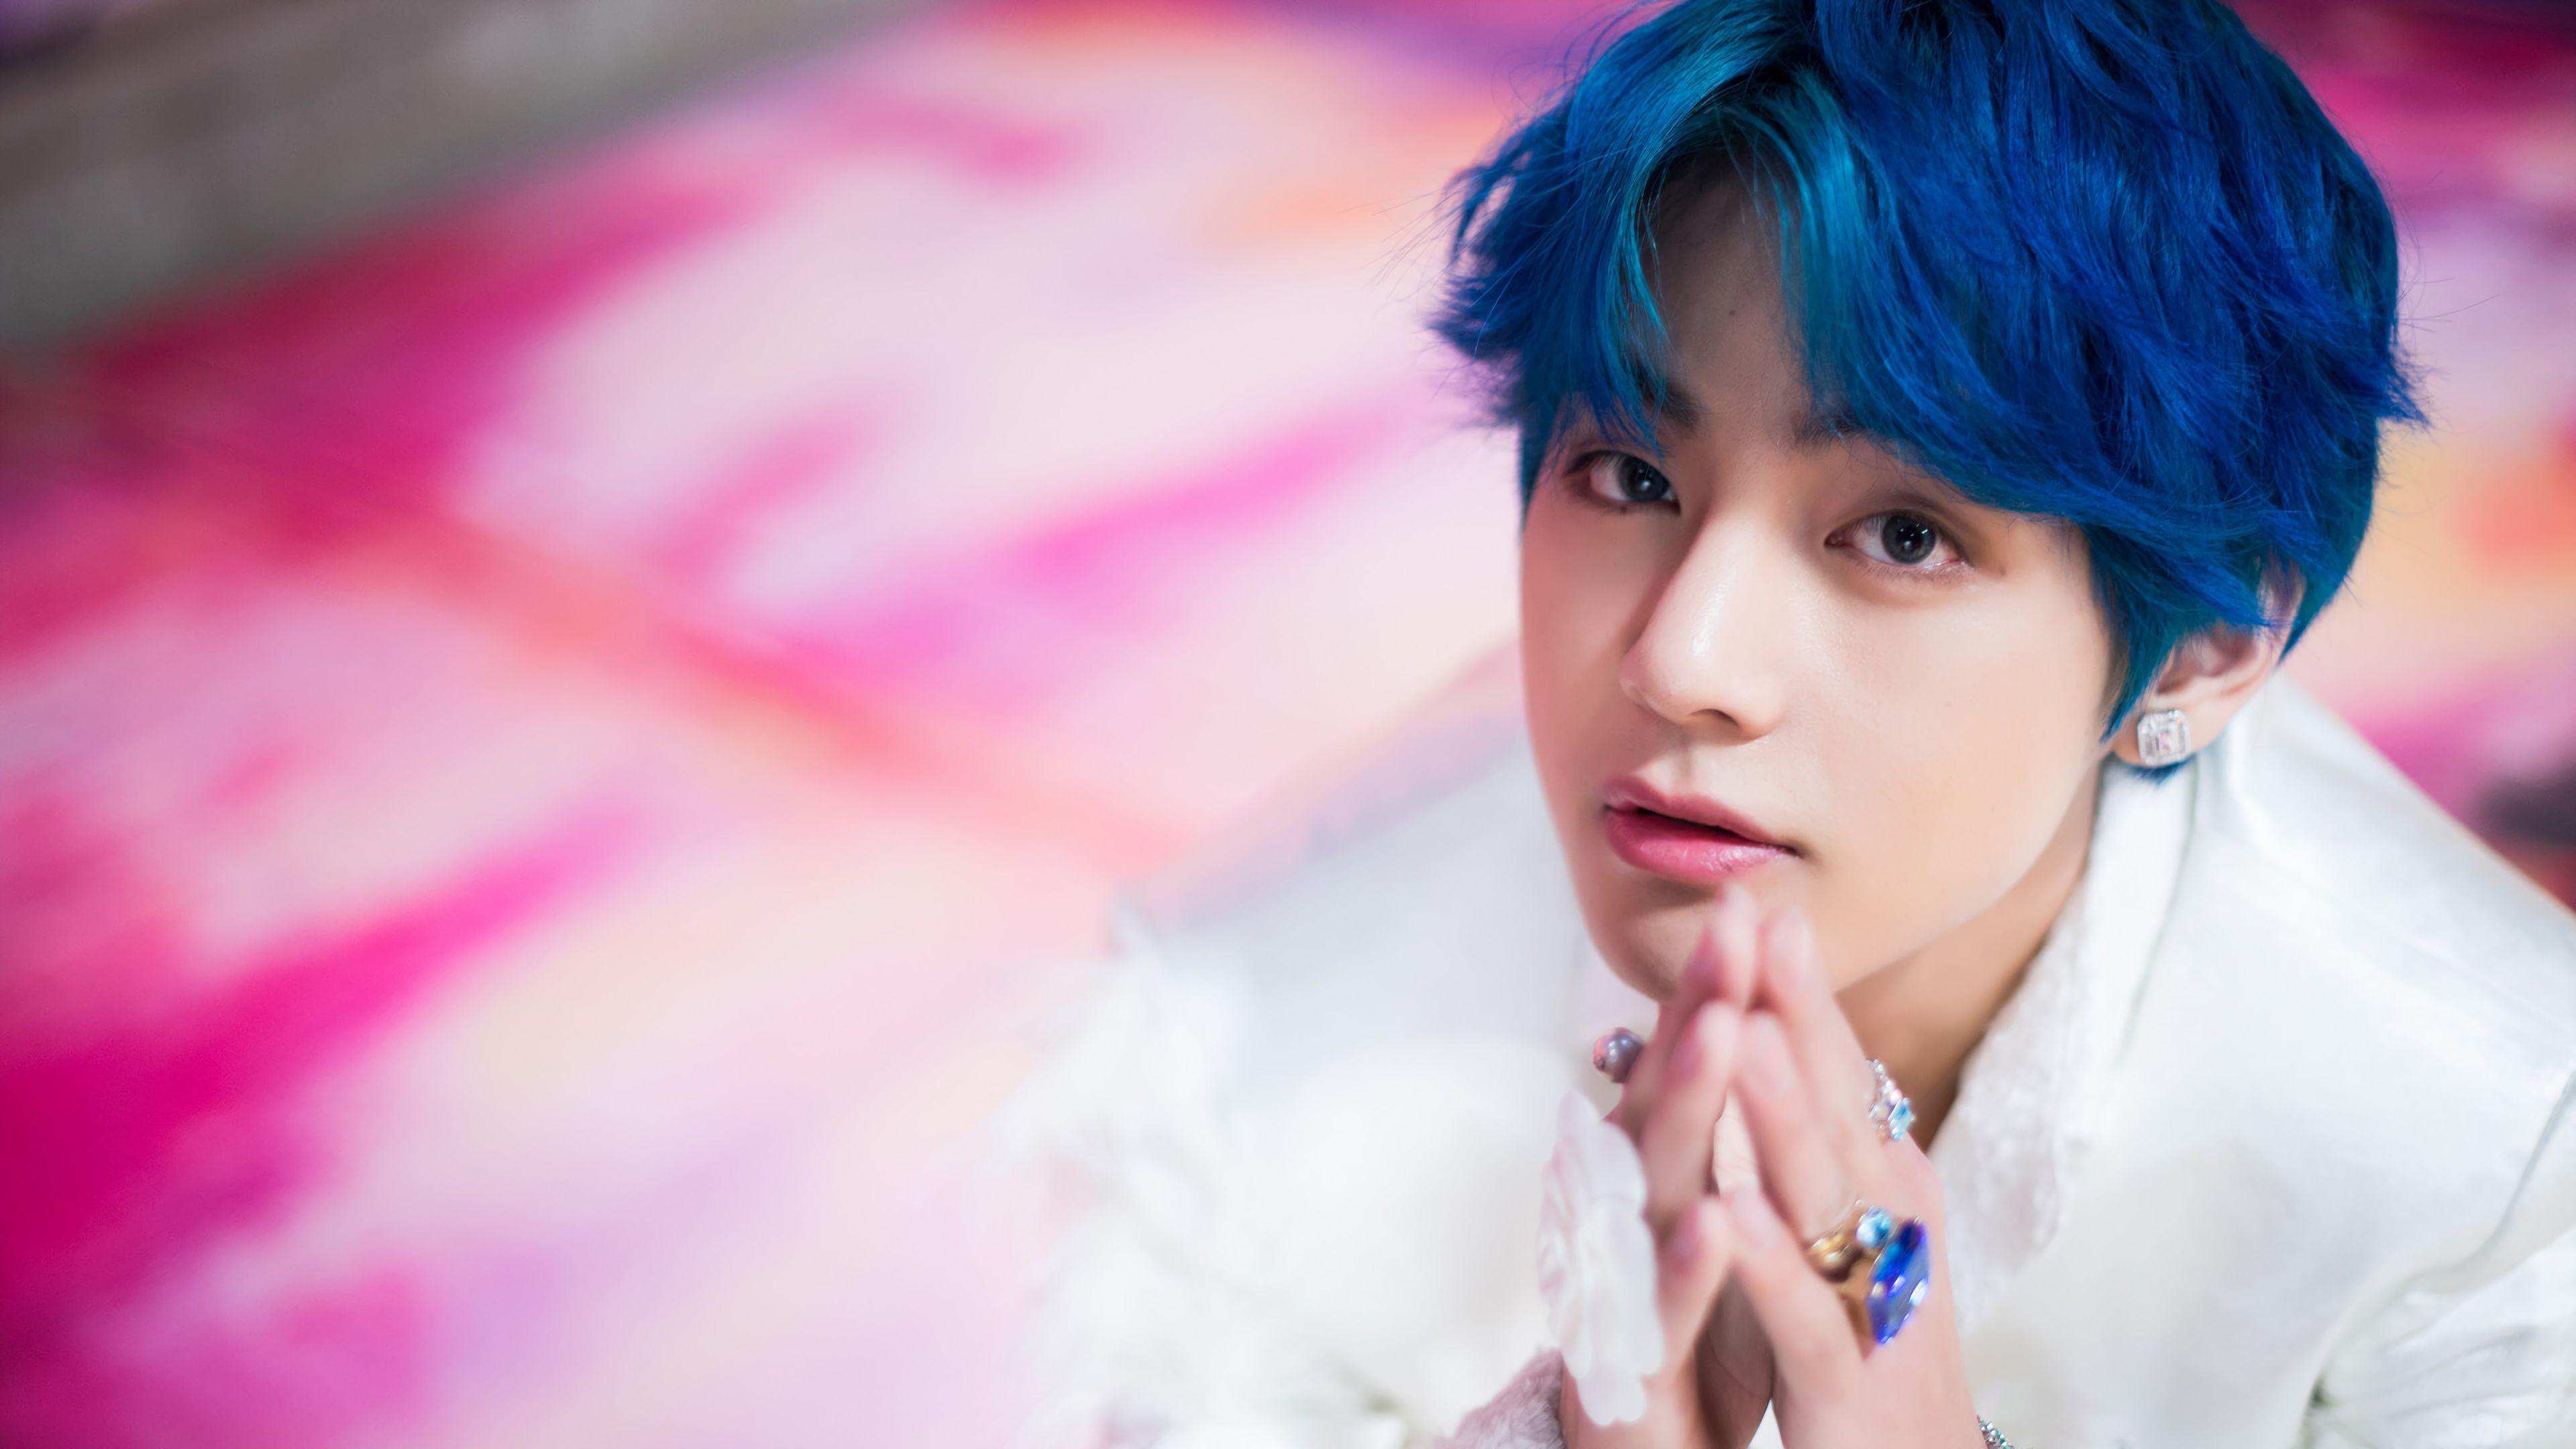 Boy With Luv Wallpapers Top Free Boy With Luv Backgrounds